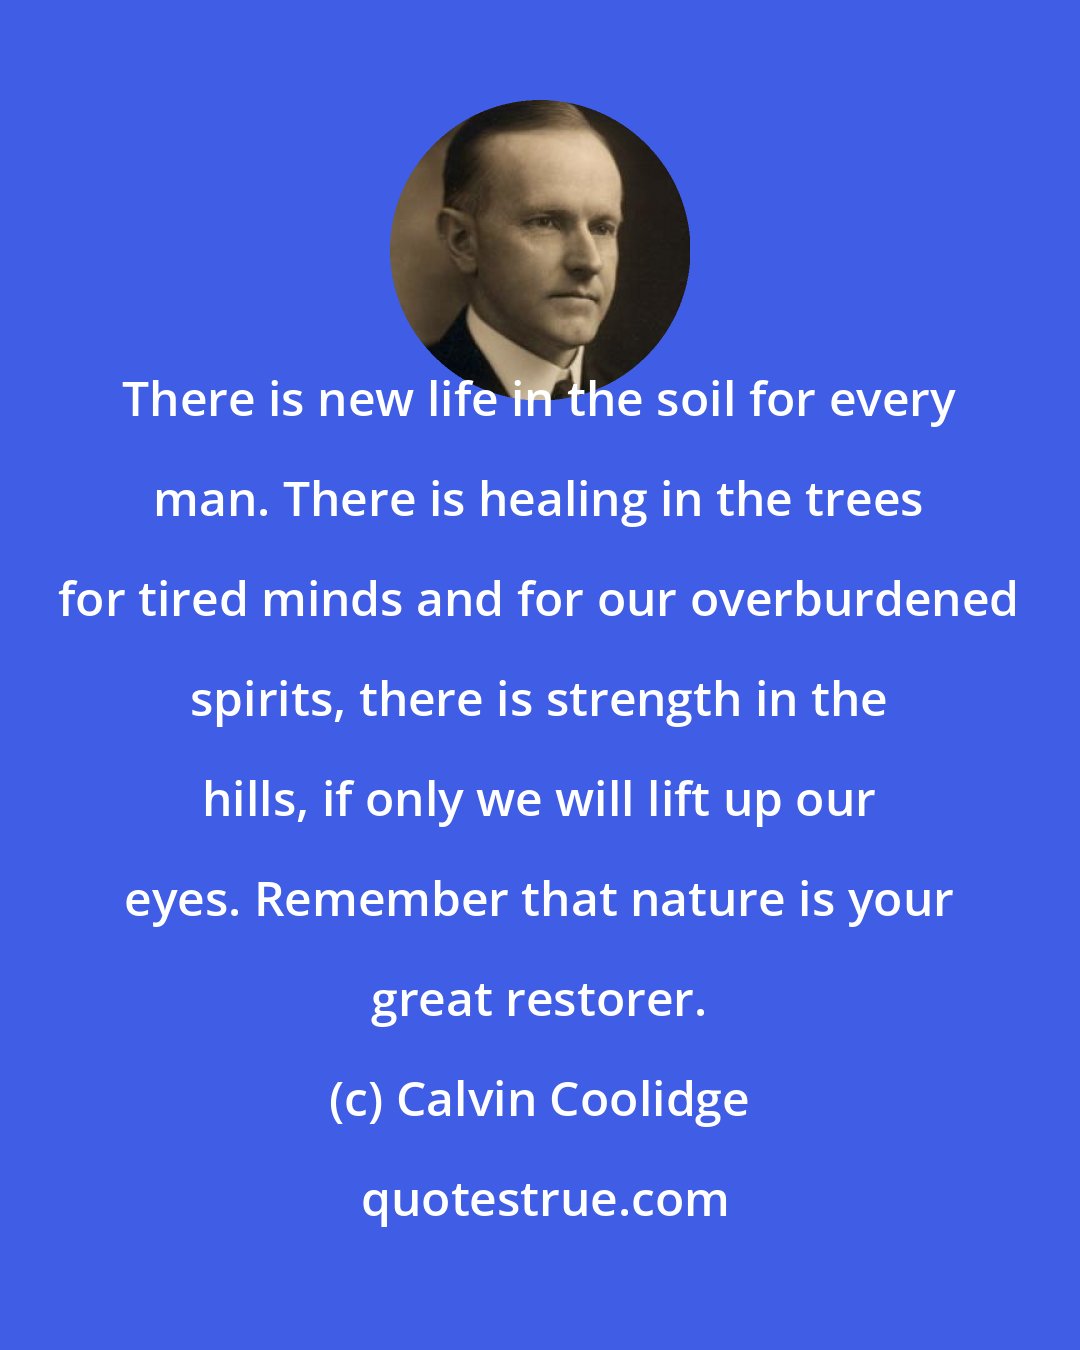 Calvin Coolidge: There is new life in the soil for every man. There is healing in the trees for tired minds and for our overburdened spirits, there is strength in the hills, if only we will lift up our eyes. Remember that nature is your great restorer.